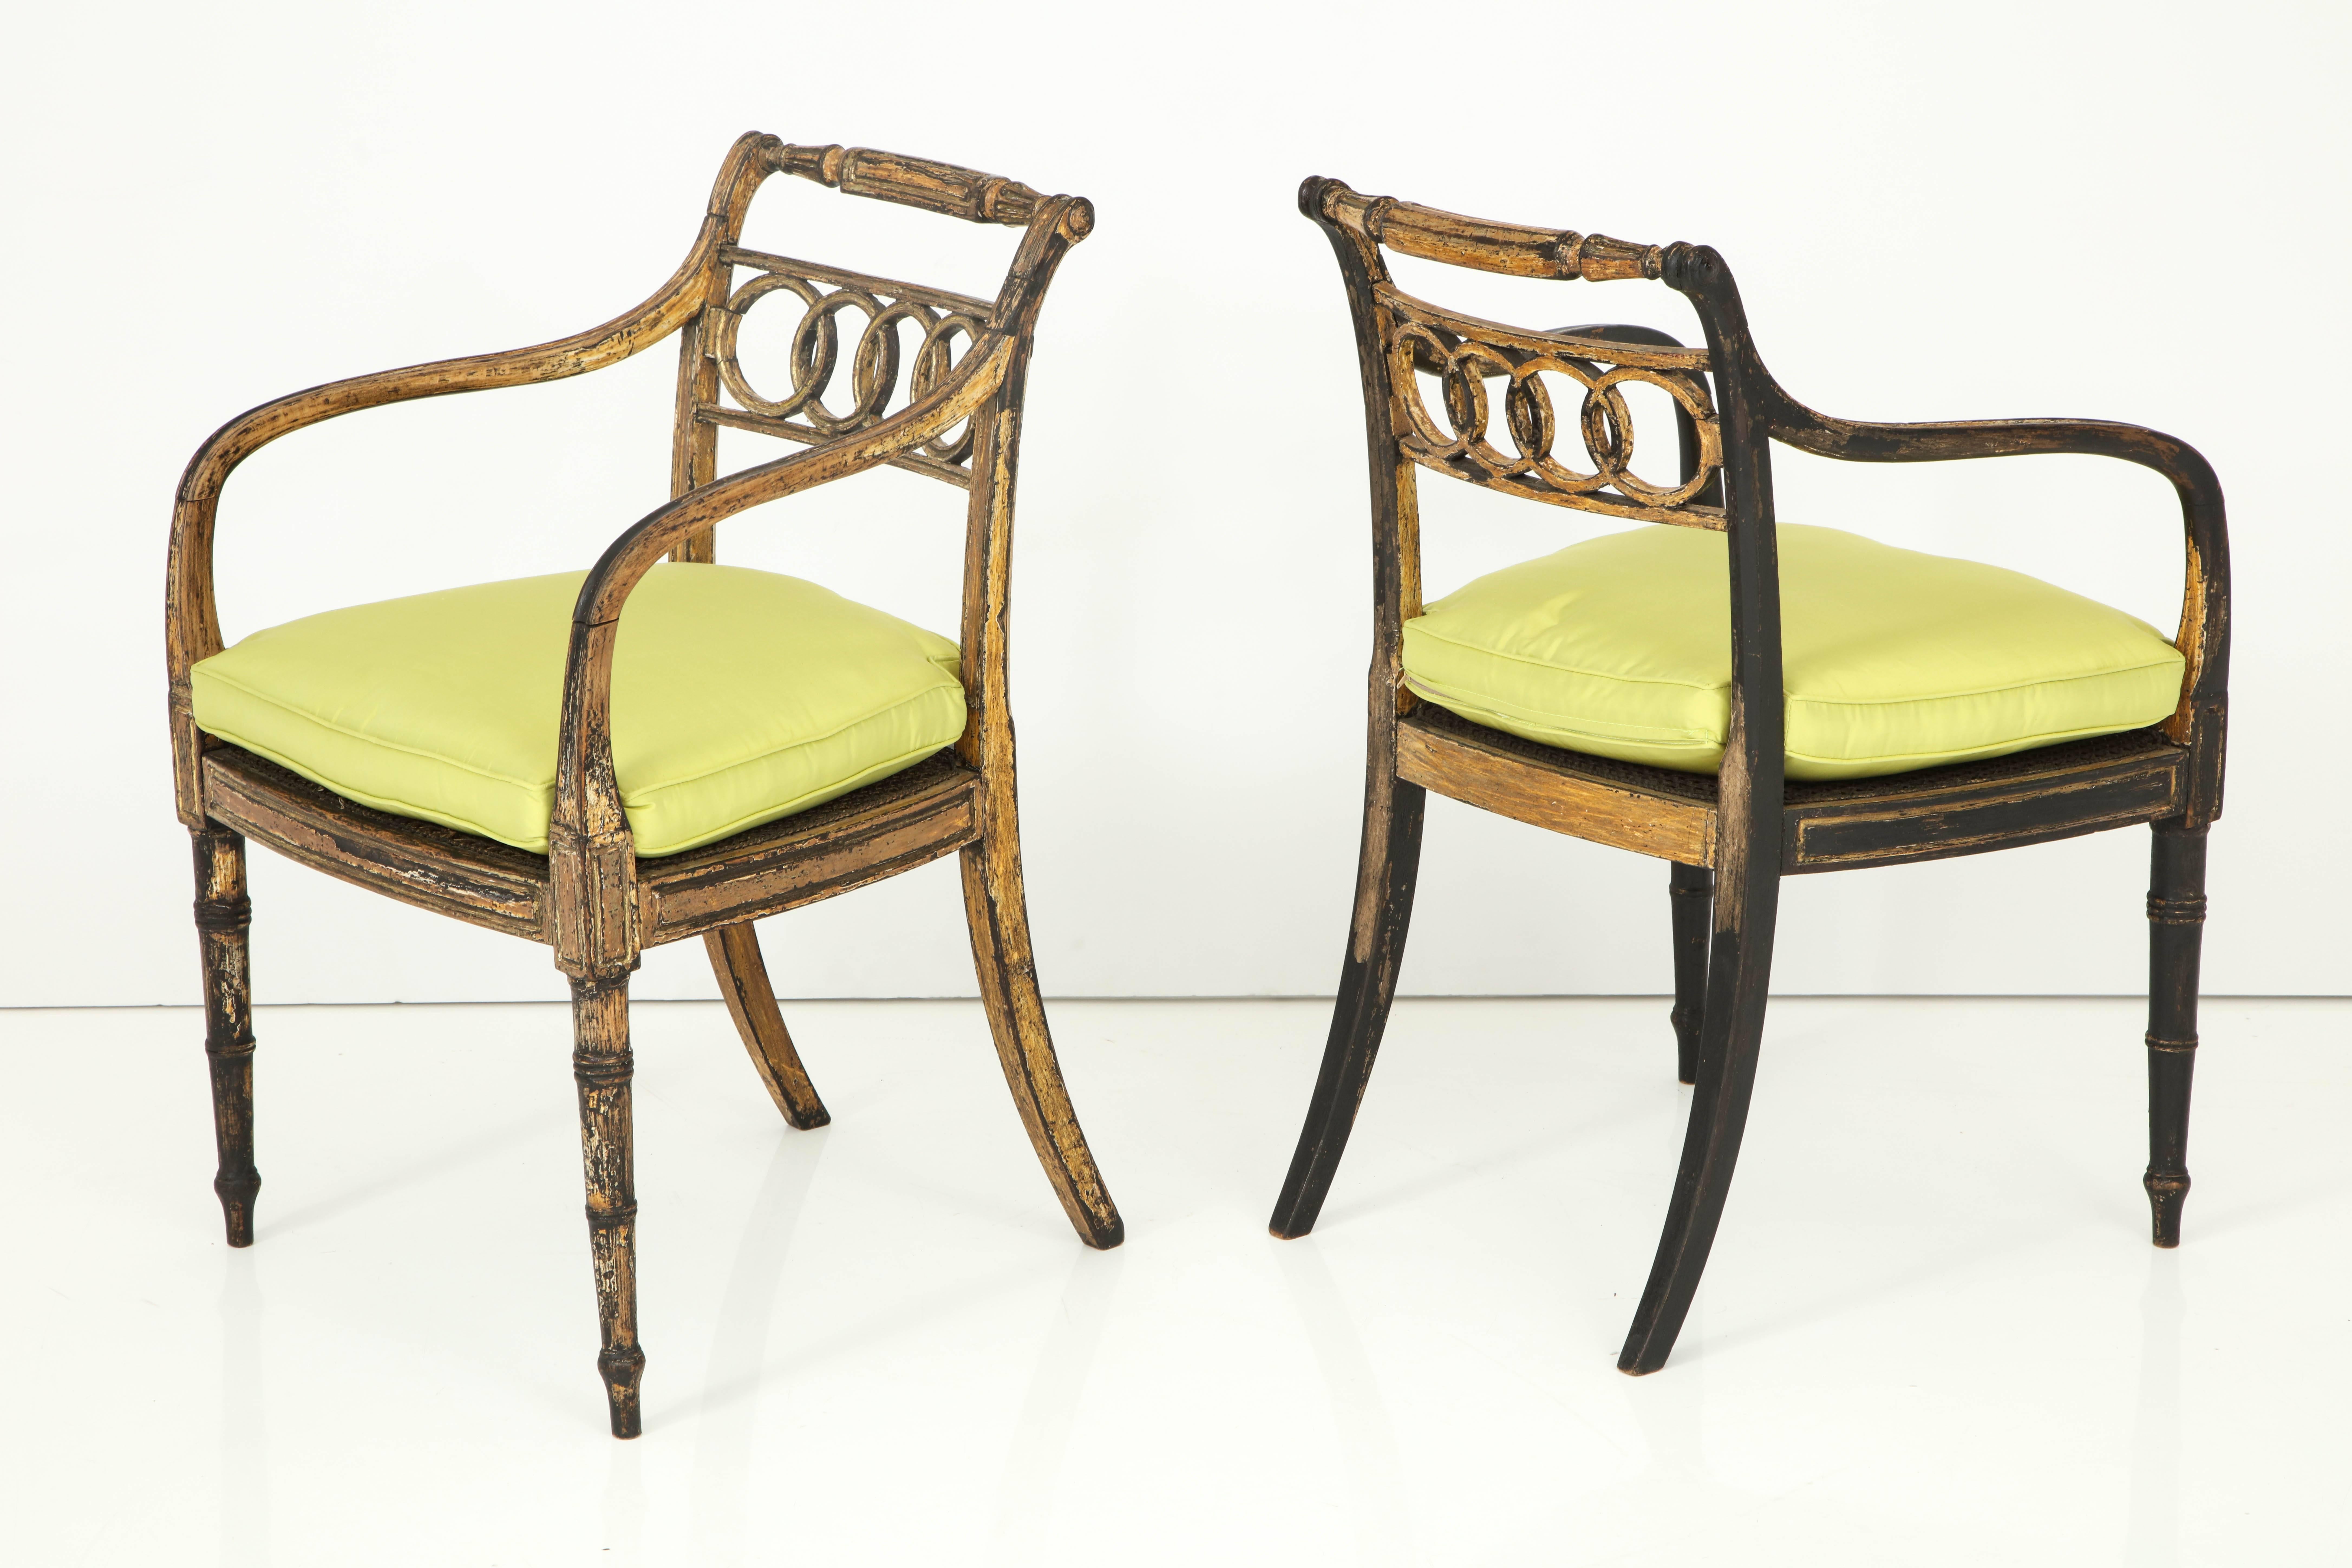 Neoclassical Pair of English Regency Painted and Parcel-Gilt Side Chairs